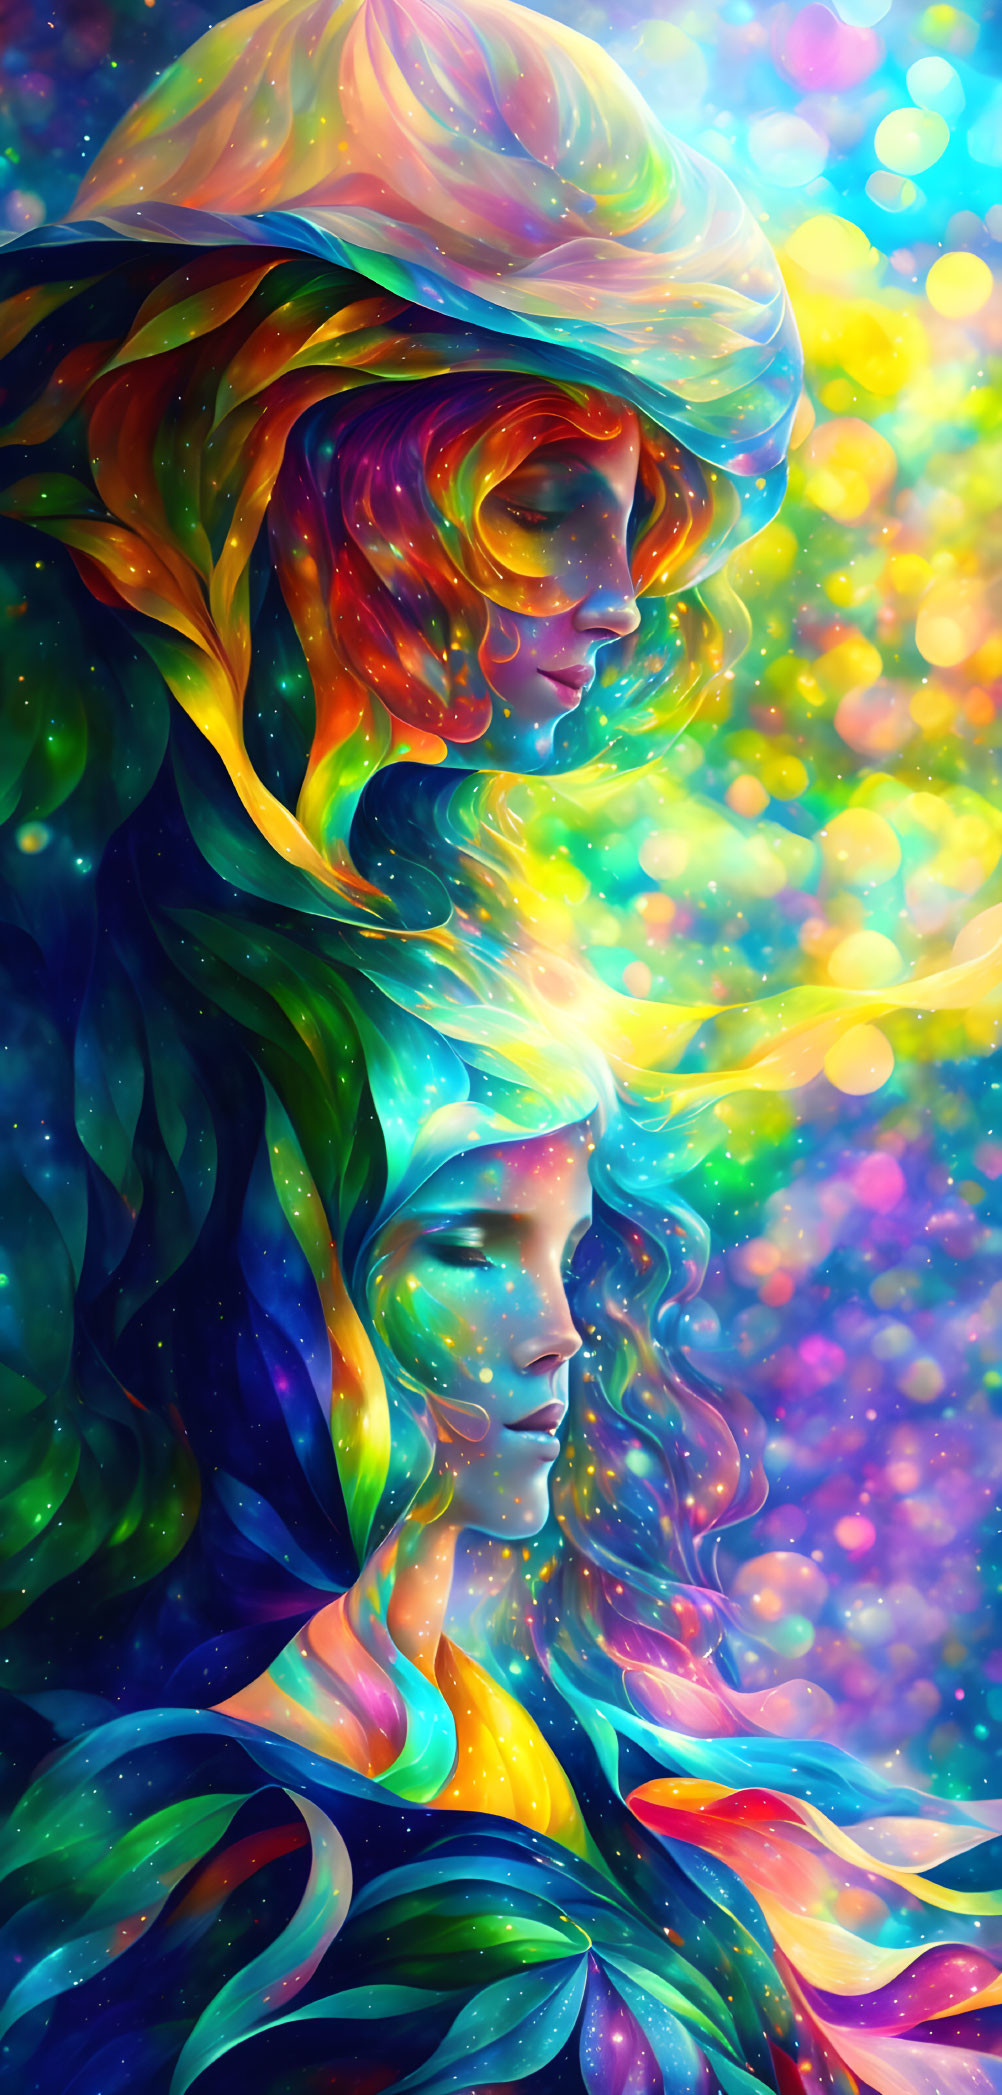 Colorful digital artwork featuring two stylized women with flowing hair in abstract background.